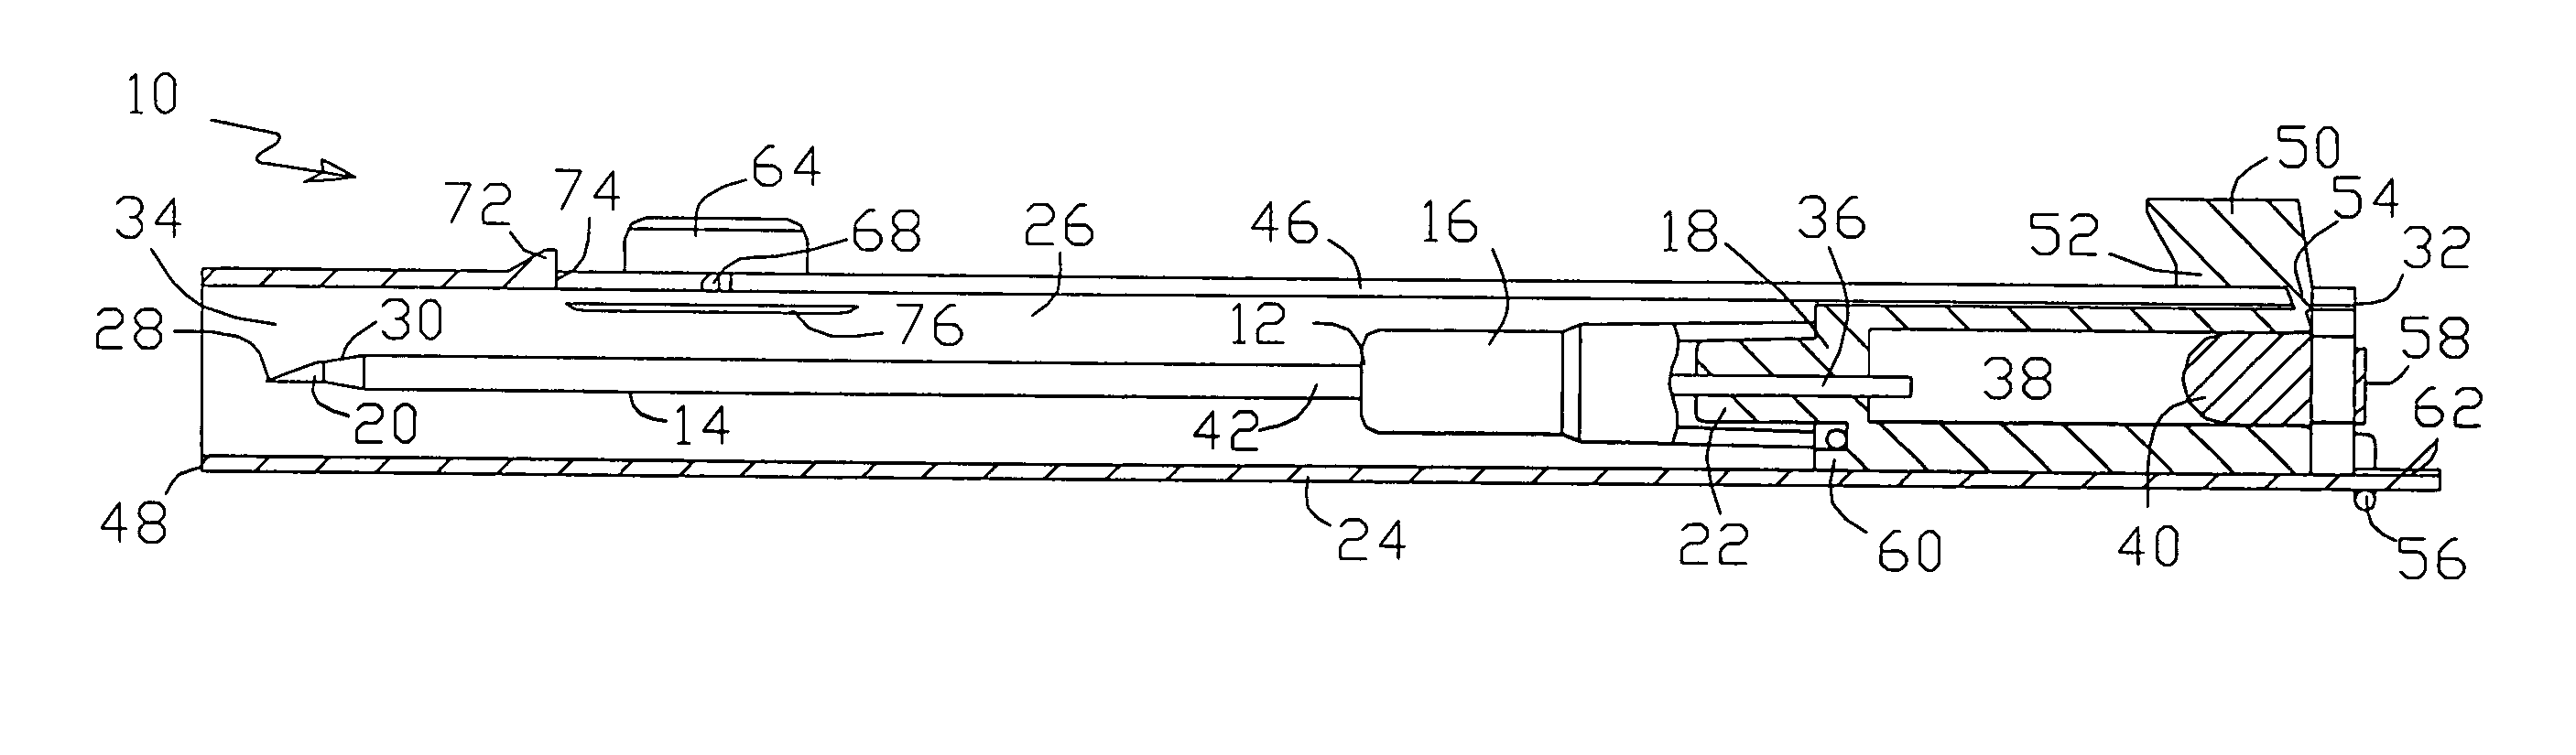 Catheter insertion apparatus with a needle tip protective system